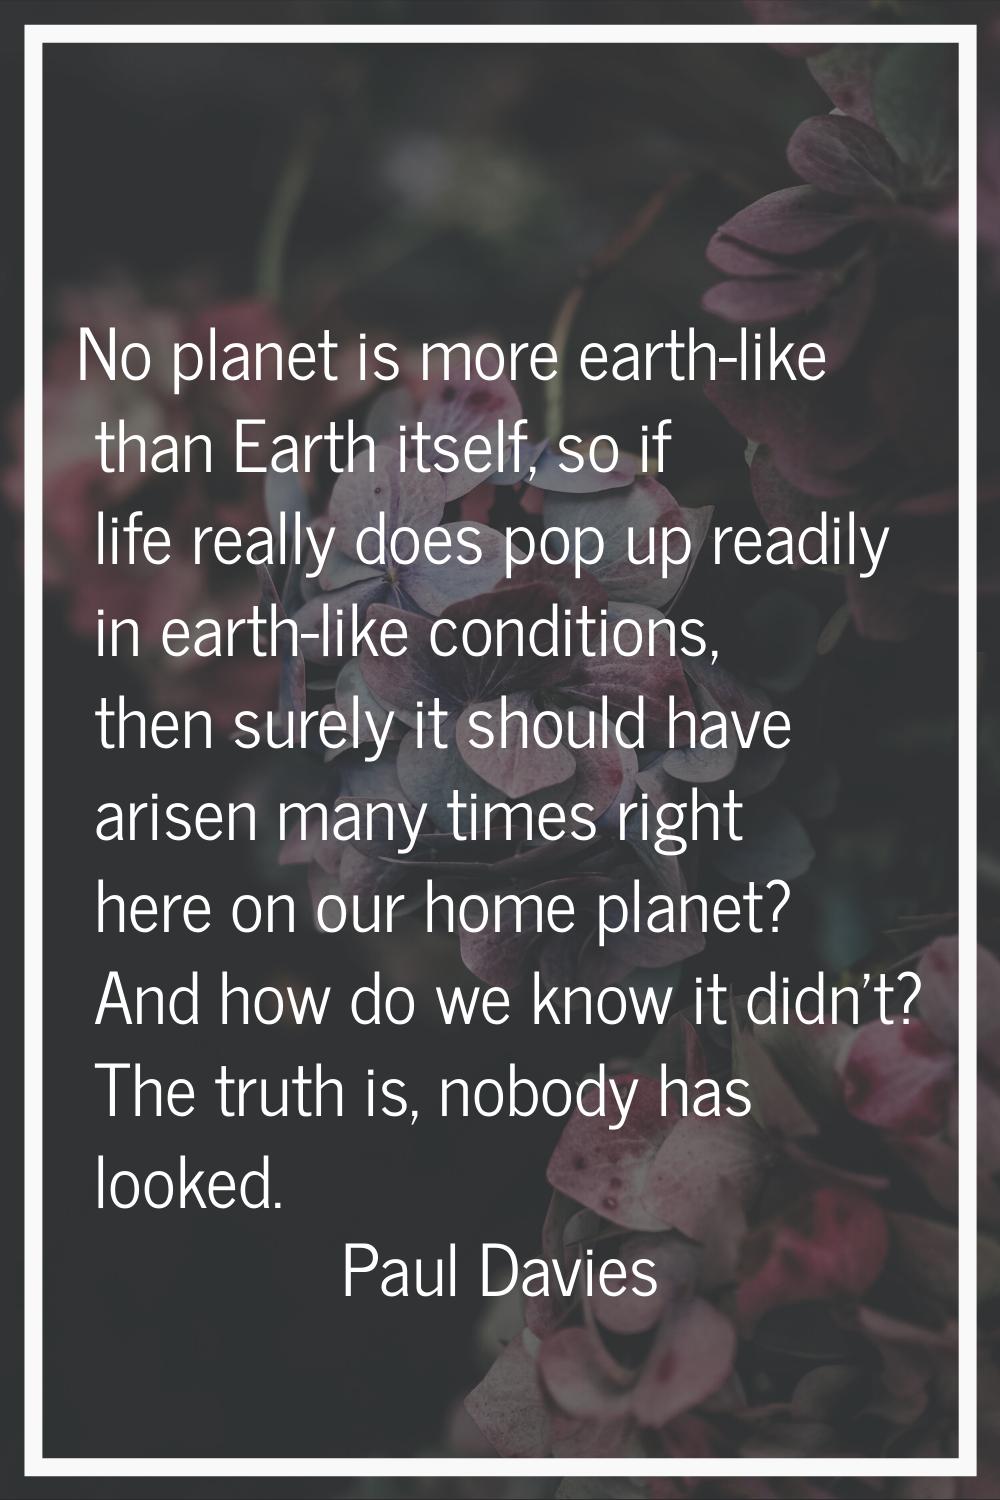 No planet is more earth-like than Earth itself, so if life really does pop up readily in earth-like